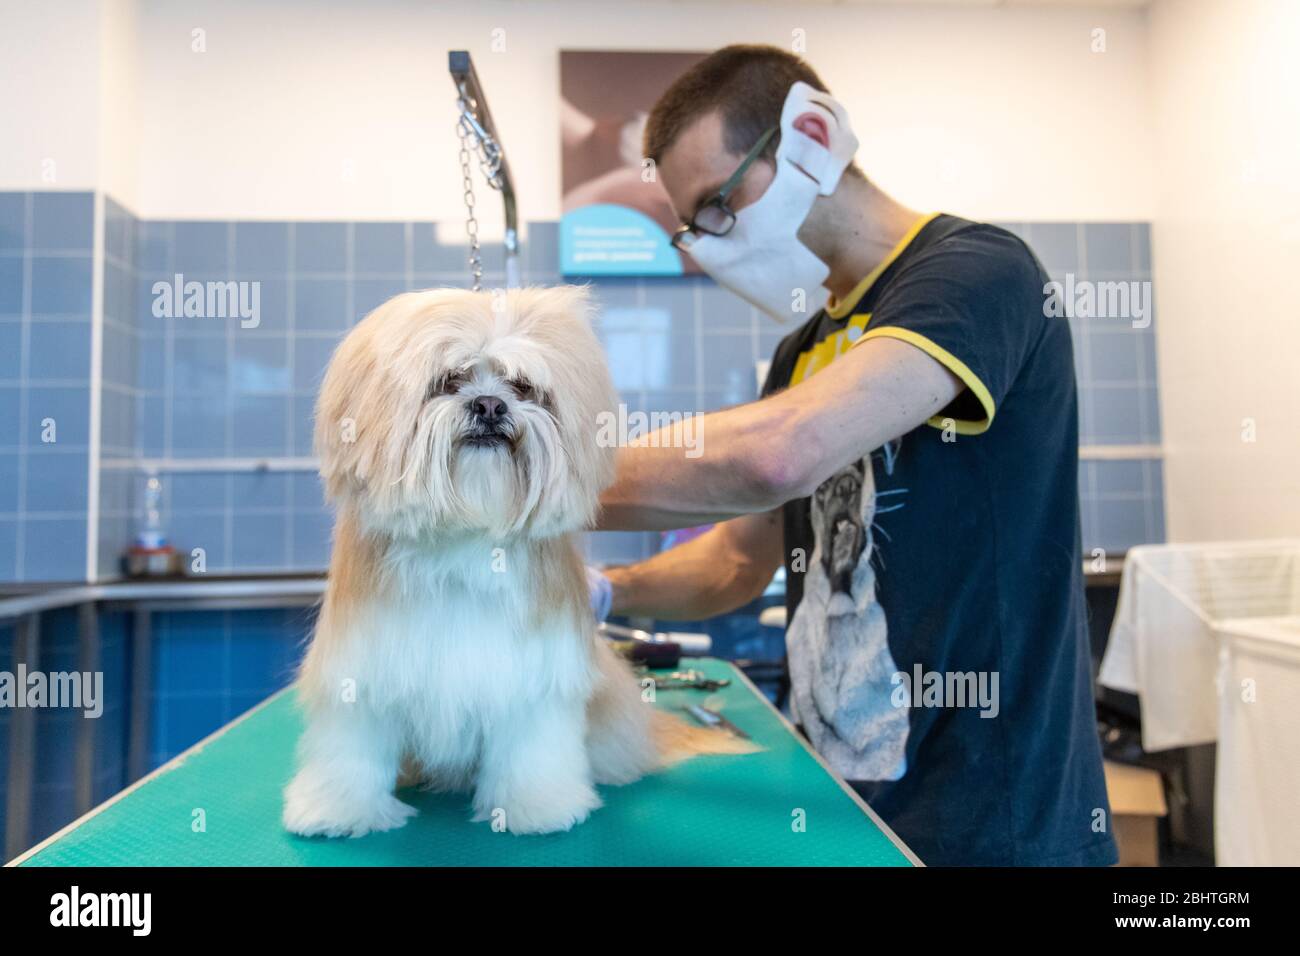 Ferrara, Italy. 27 April, 2020.  Dog grooming shops reopen after the lockout period due to the covid19 pandemic in Ferrara, Italy.   Credit: Filippo Rubin / Alamy Live News Stock Photo